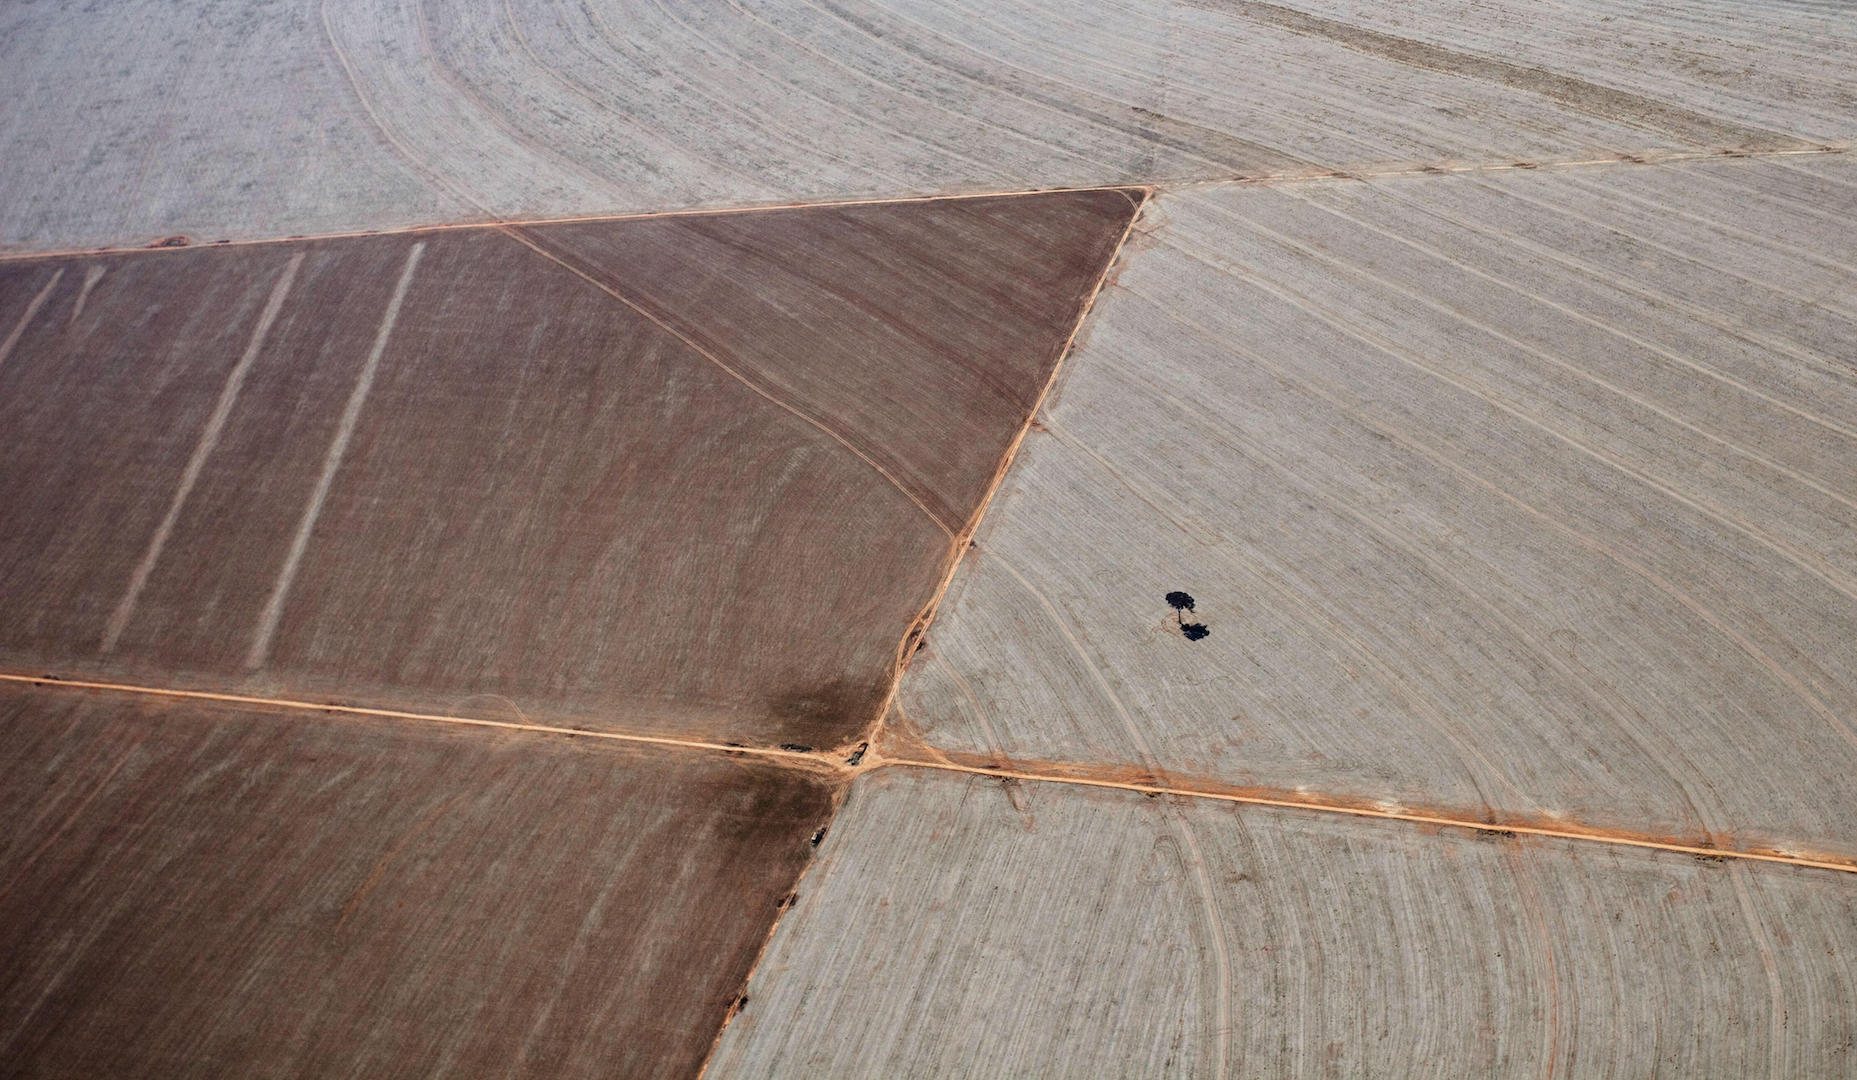 Aerial view of a soybean plantation in Canarana, Mato Grosso state